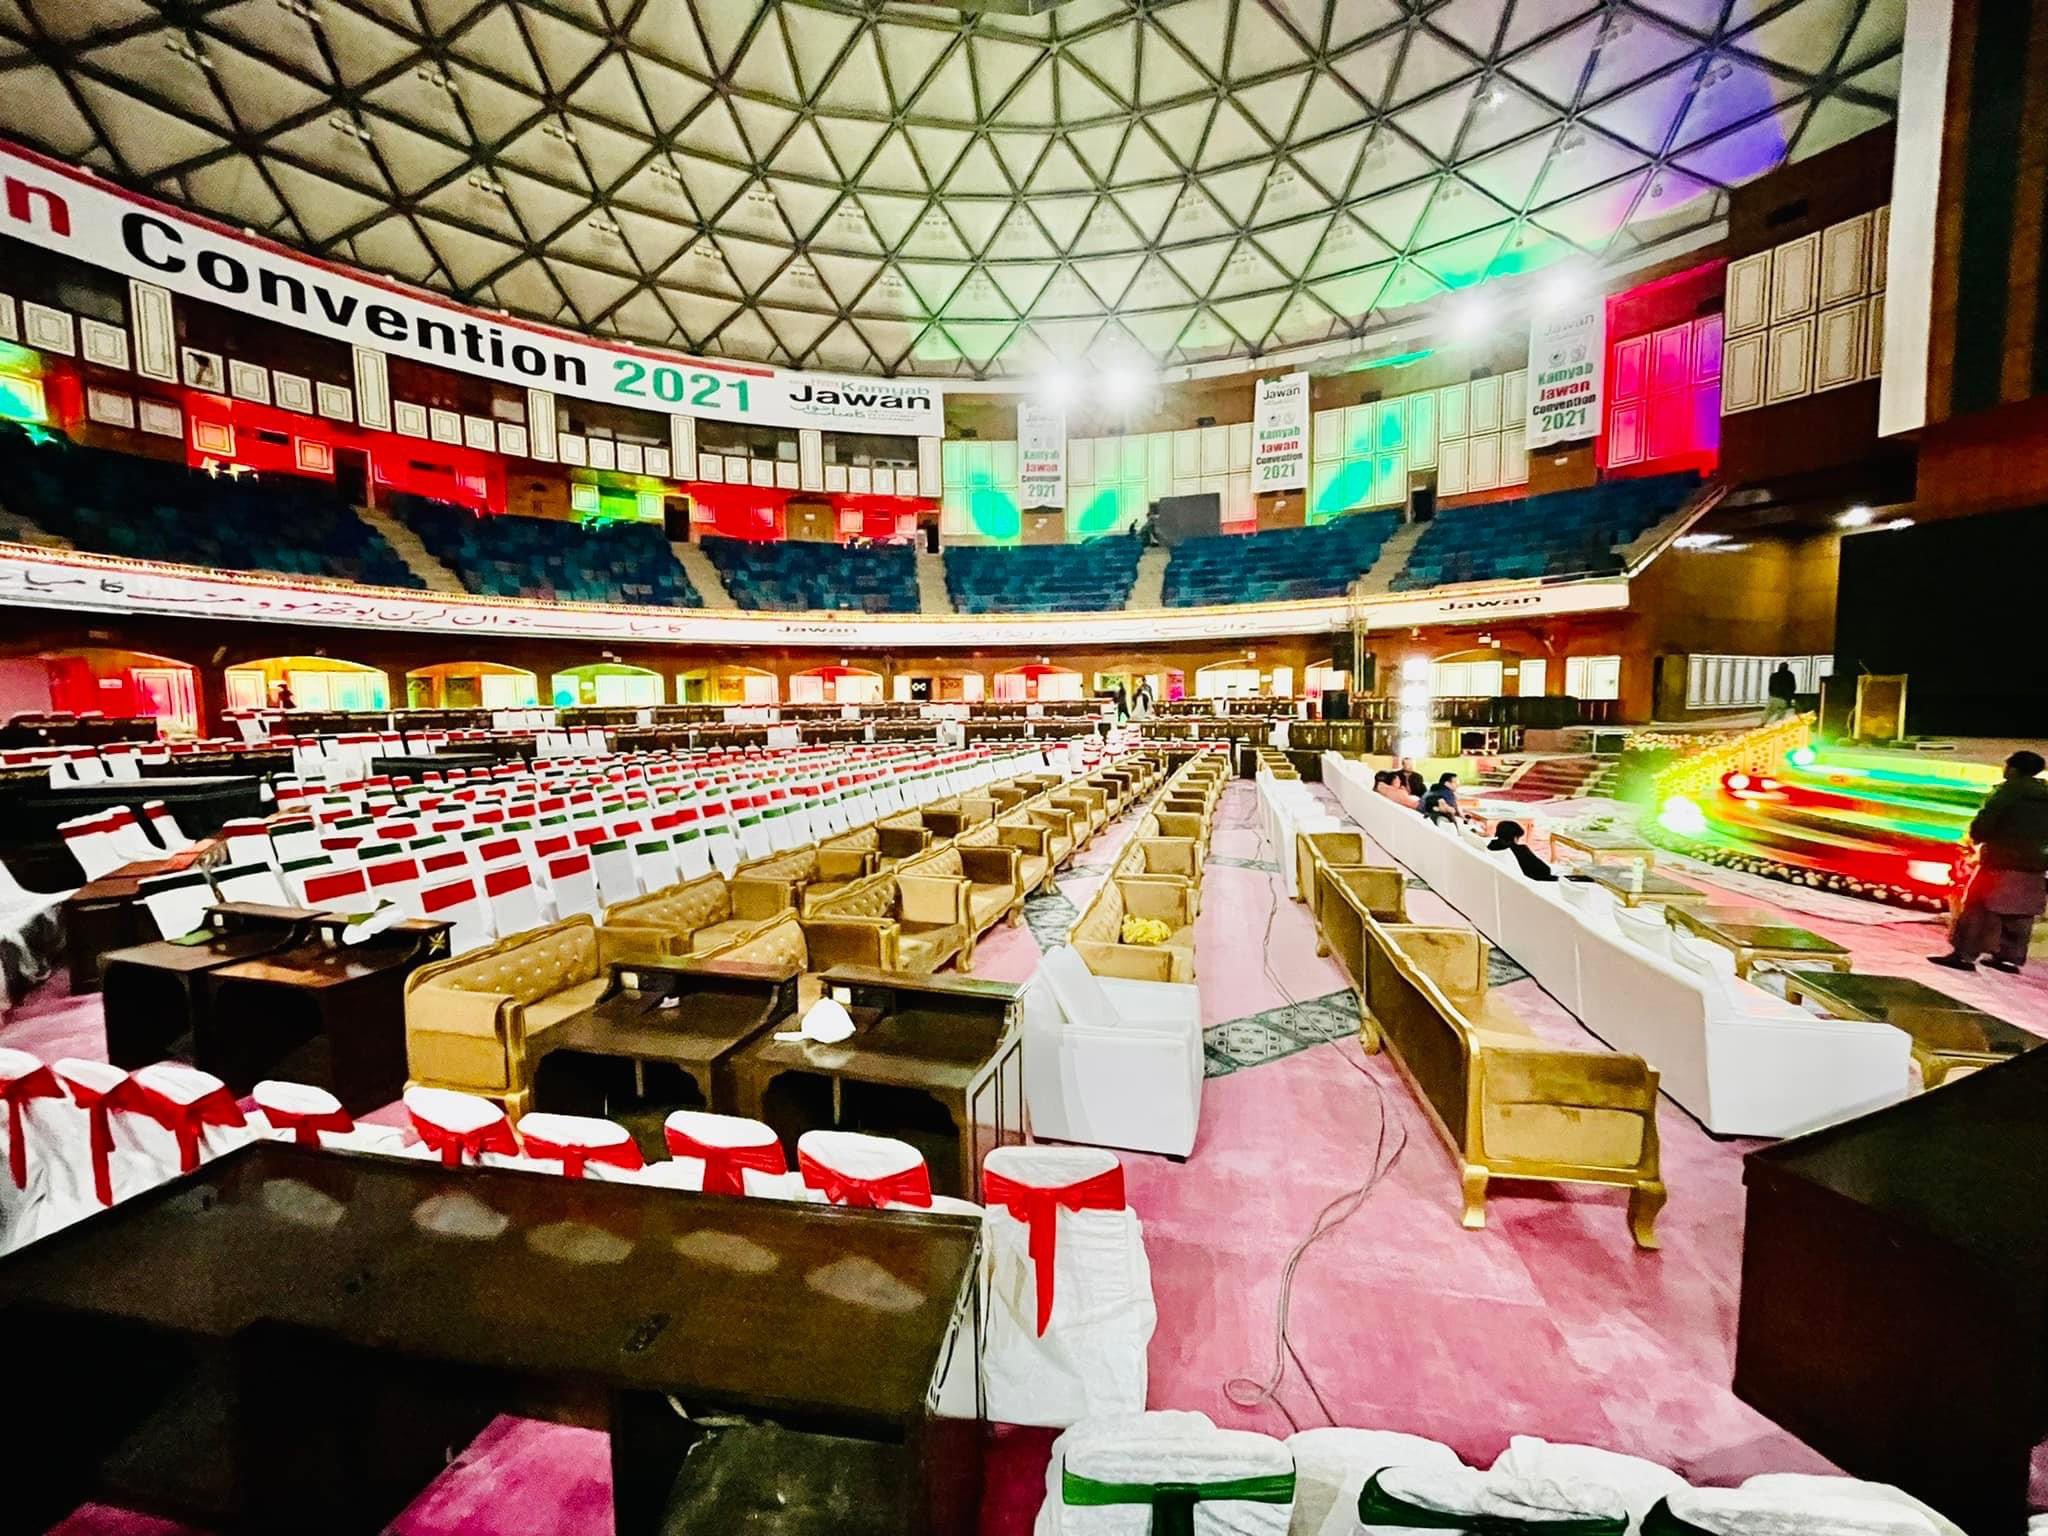 Discover why MassComm Solutions is your ideal choice for event management at Jinnah Convention Center in Islamabad. From their experience and local knowledge to professionalism and creativity, learn how they can make your event a success.